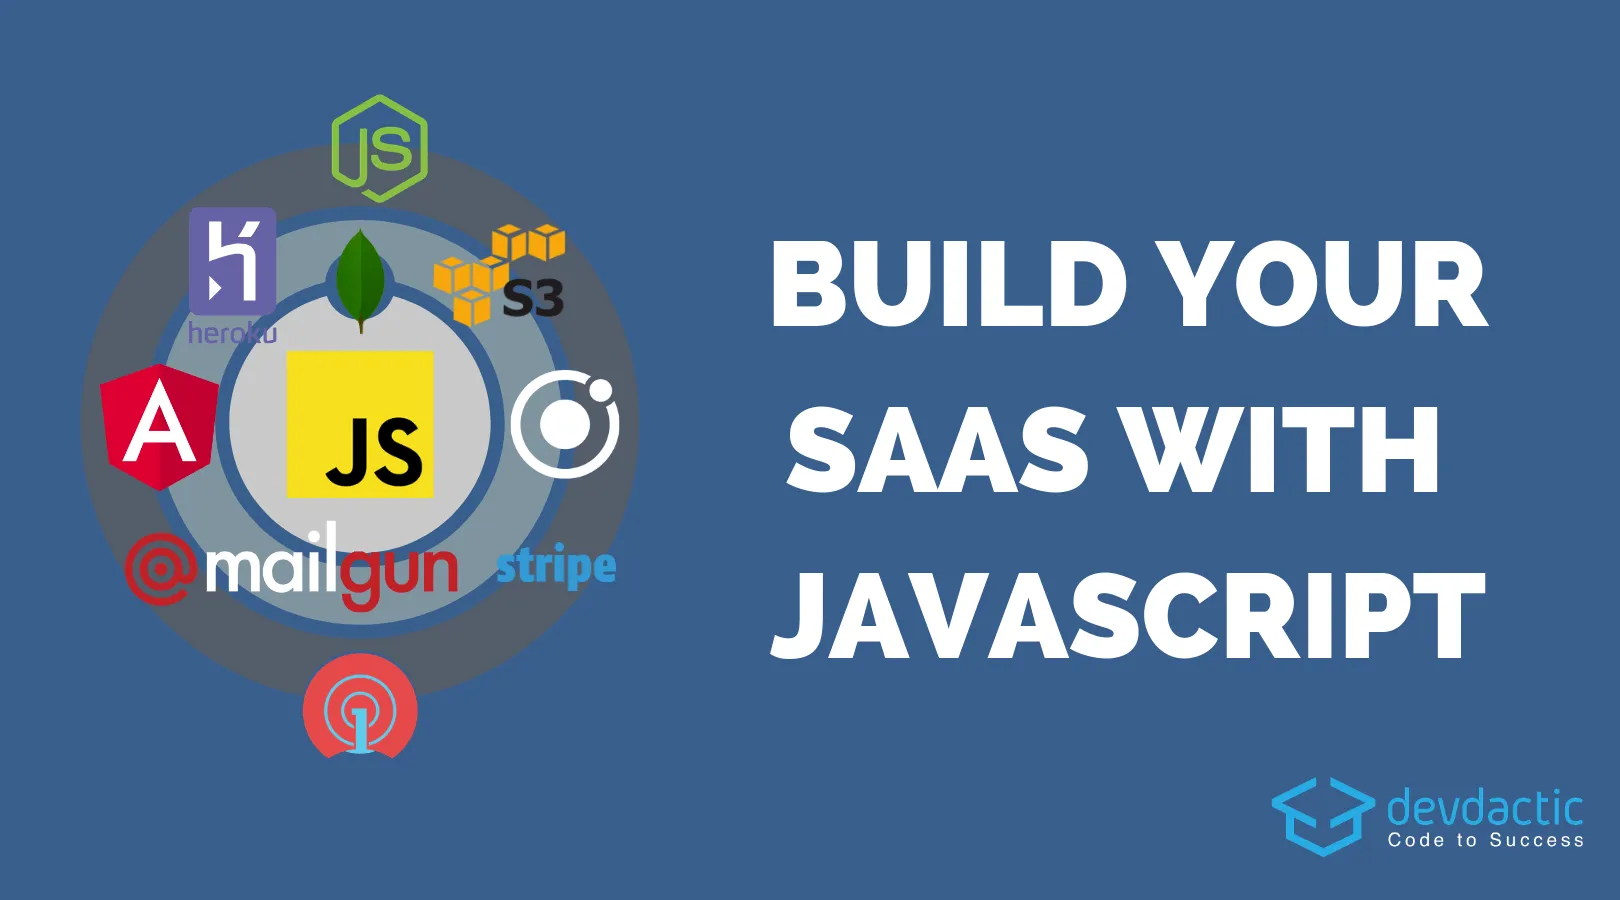 How to Build Your SaaS With Javascript (and why it's Awesome)